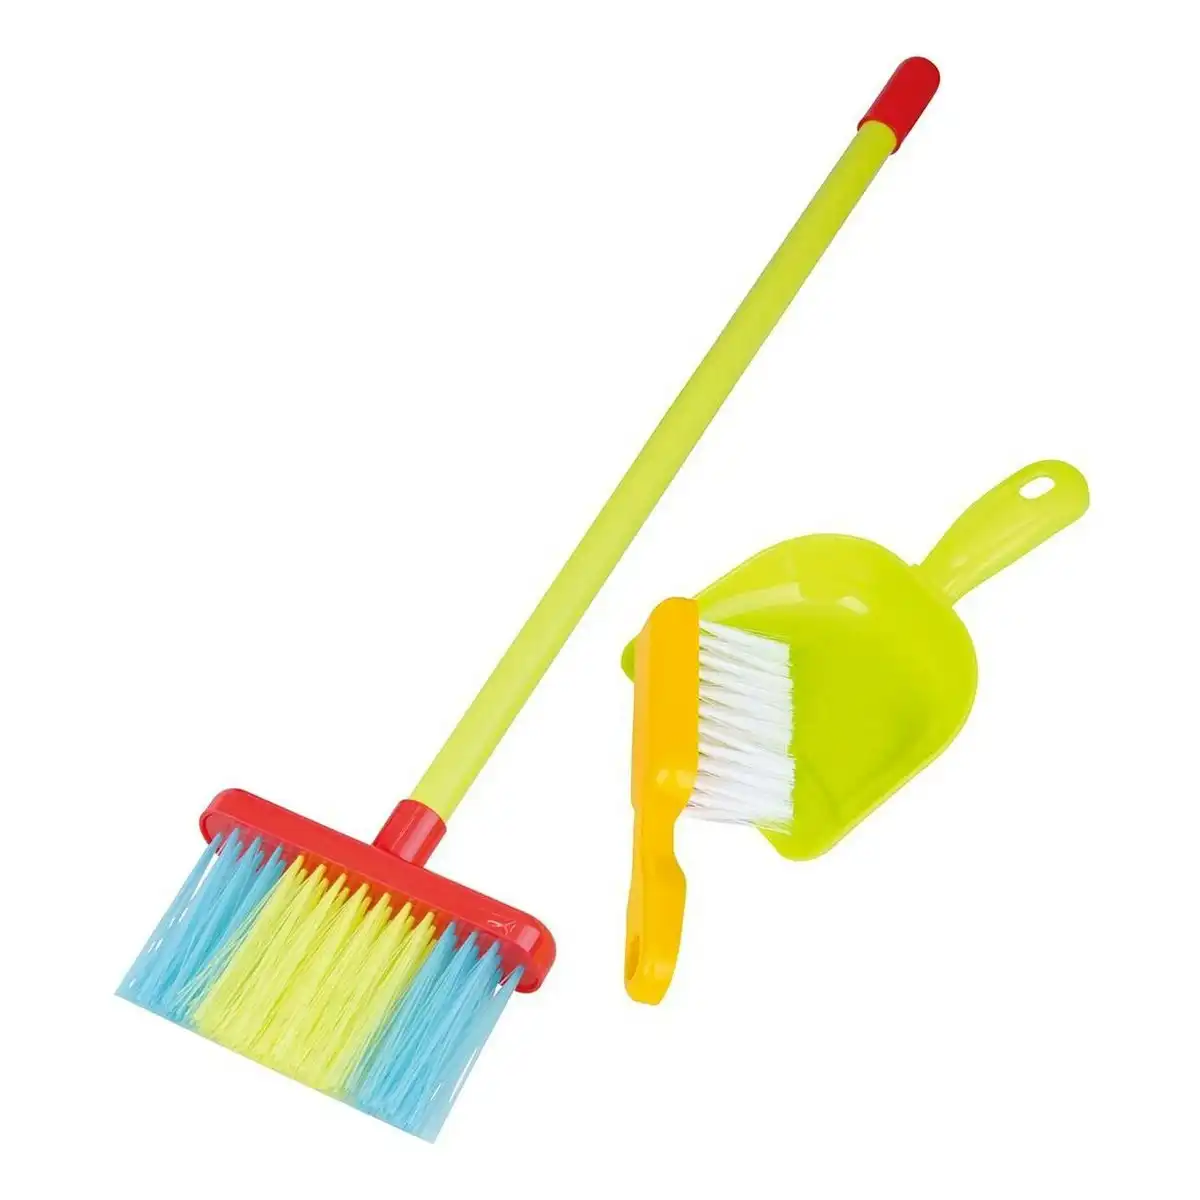 My Cleaning Set 3 Piece Playgo Toys Ent. Ltd